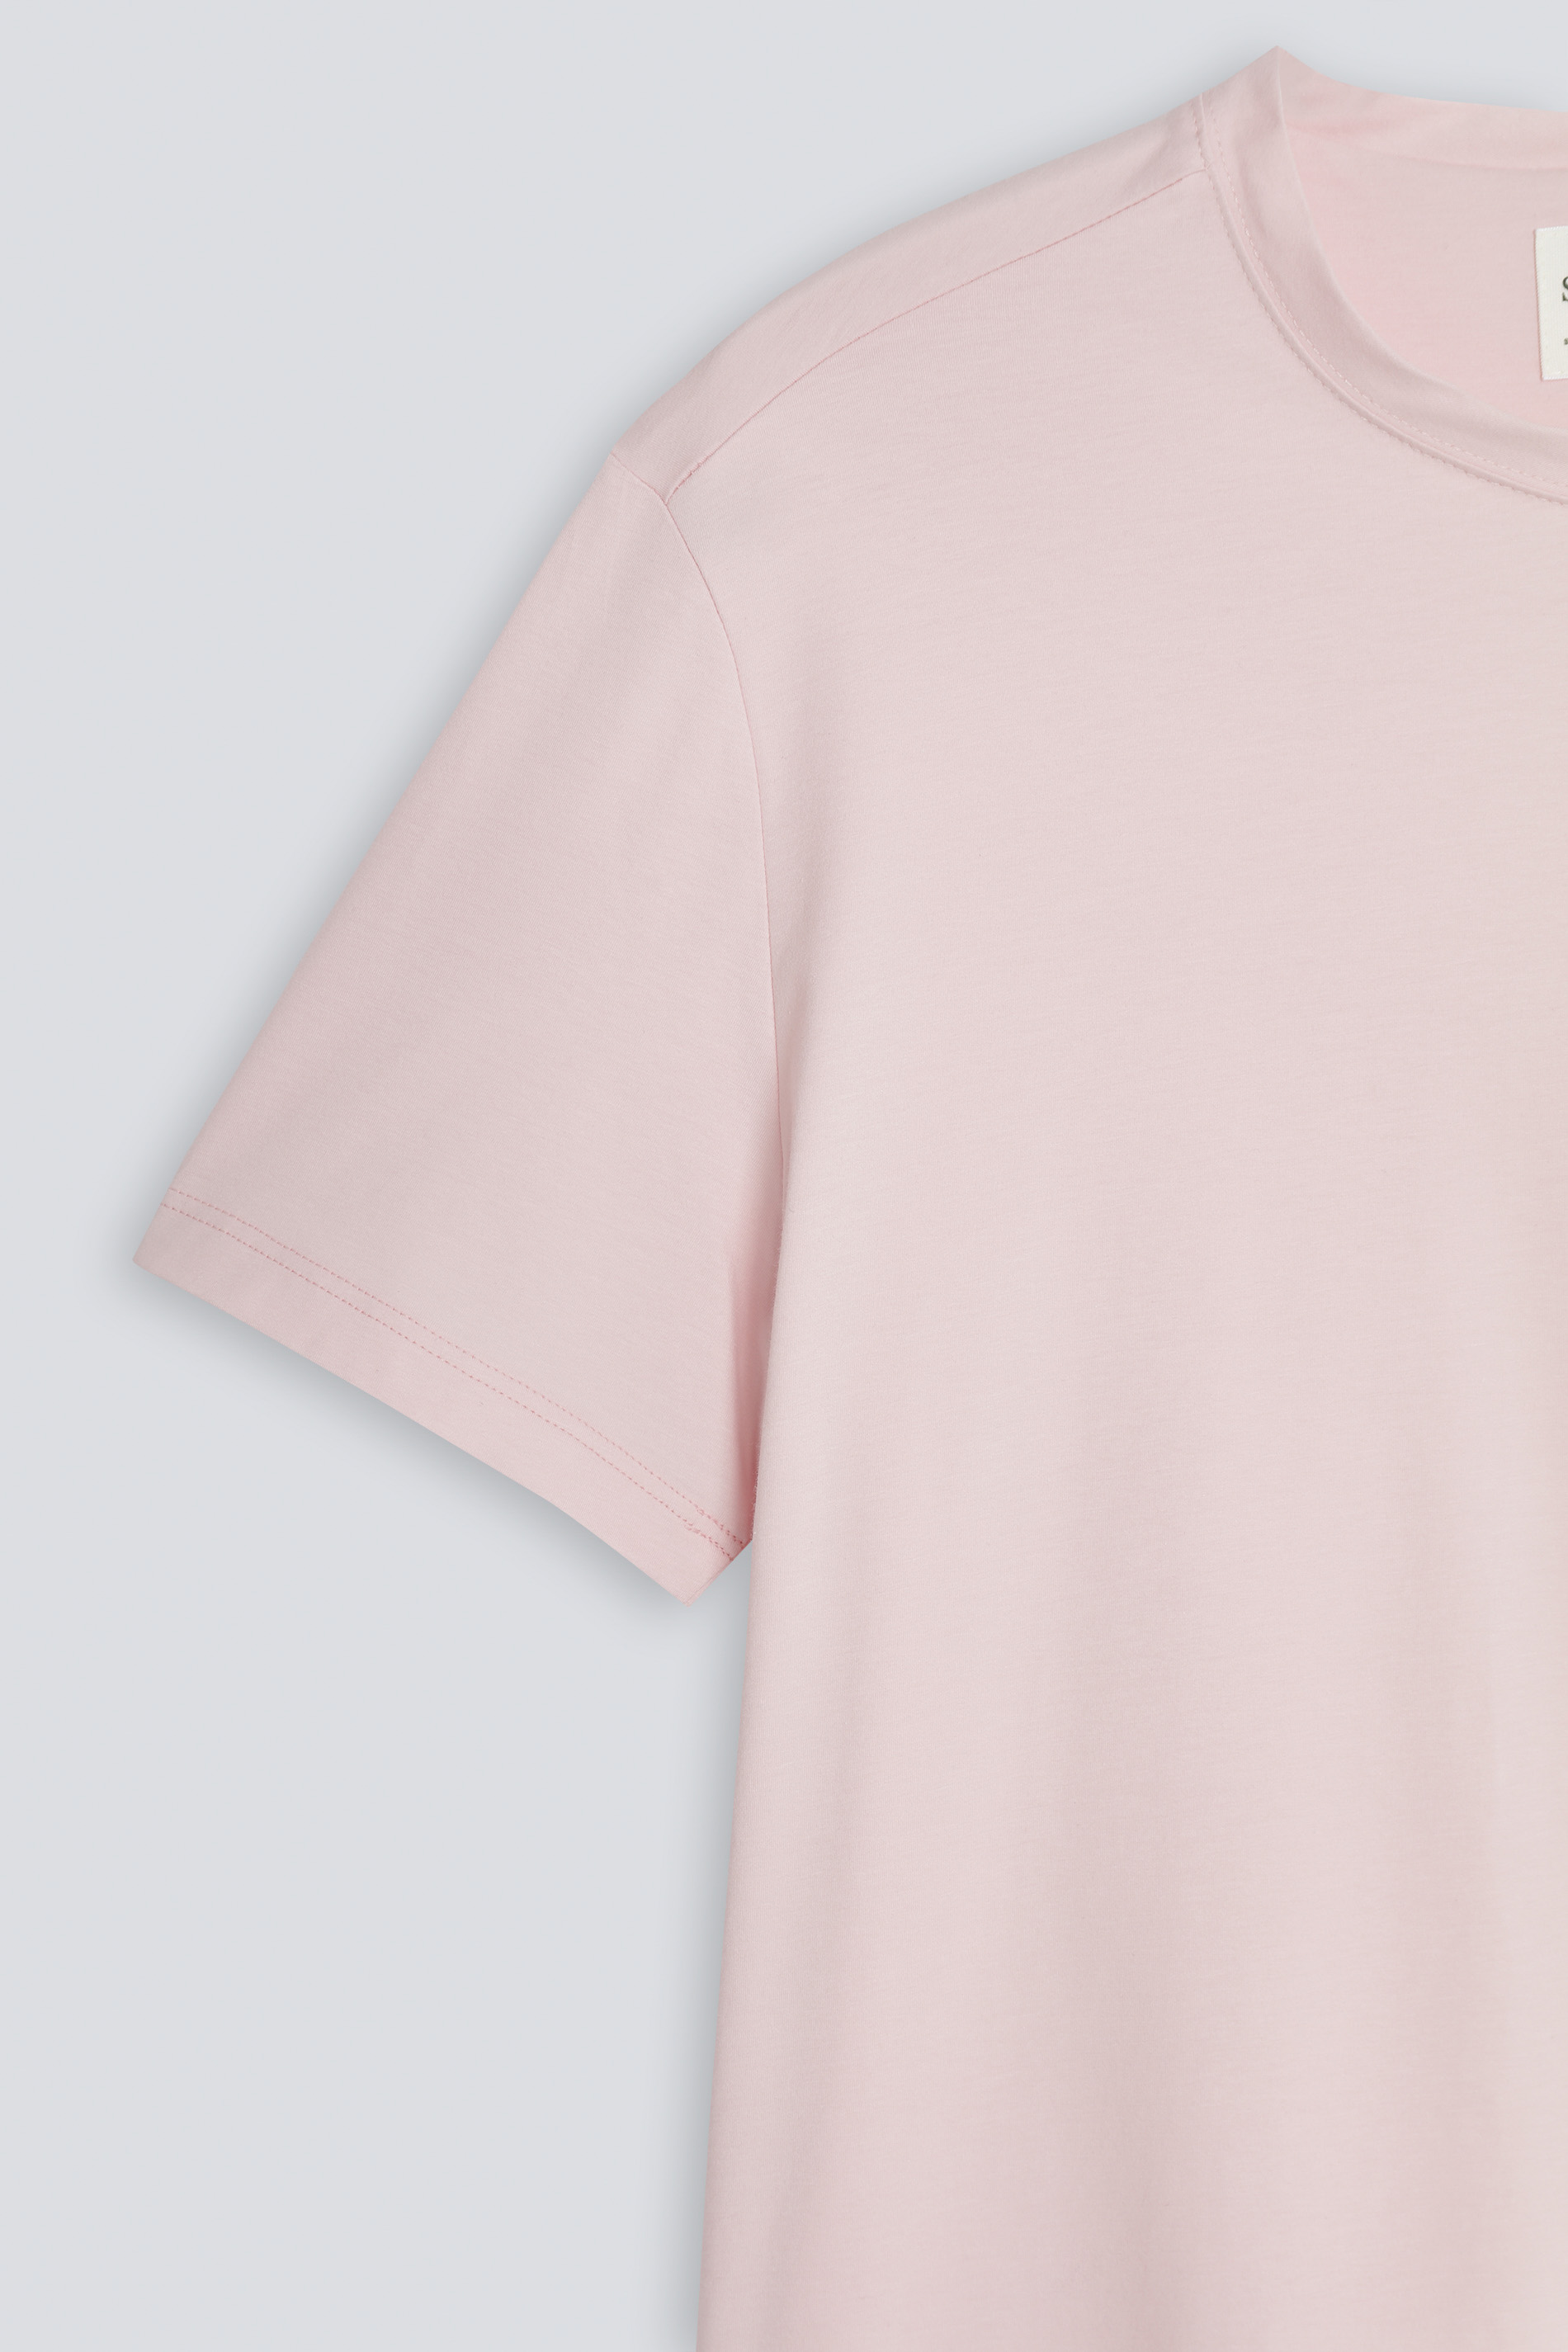 T-shirt Serie Cotone Stretch Detailweergave 01 | mey®